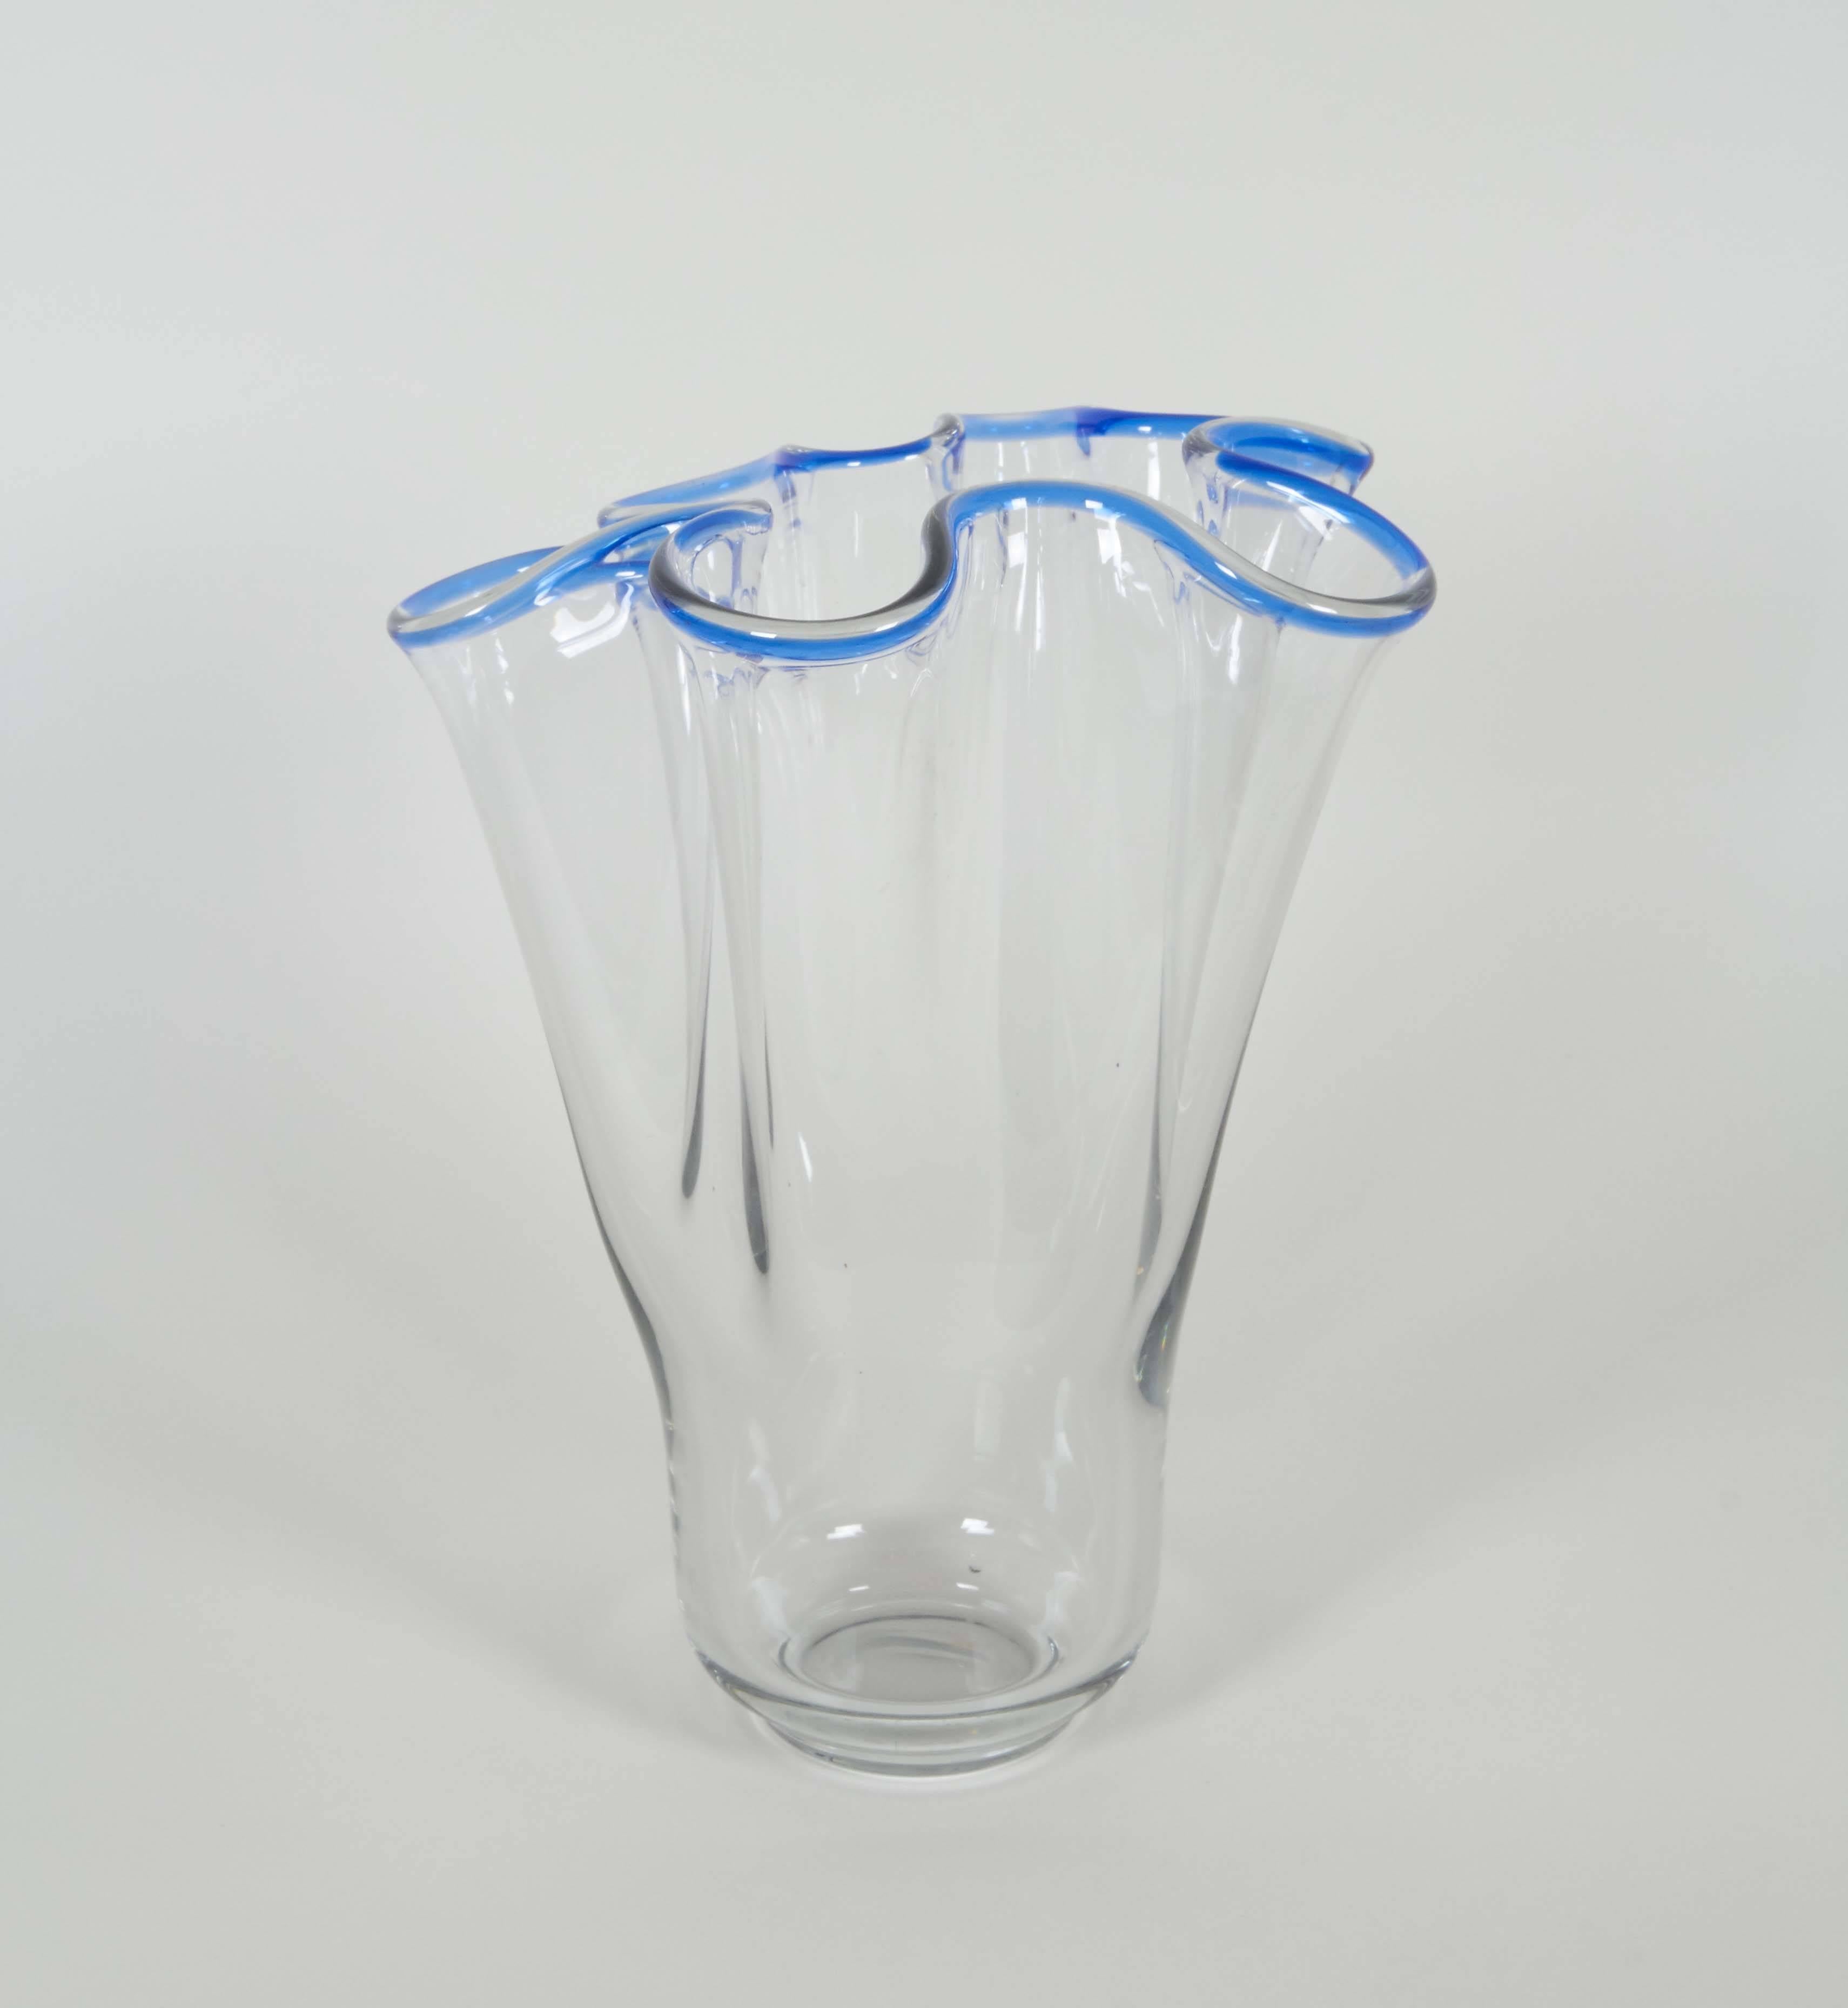 A vintage art glass footed vase, in clear glass with flared 'handkerchief' style blue rim. This vase remains in very good condition, minuscule wear to base consistent with age and use.

10439